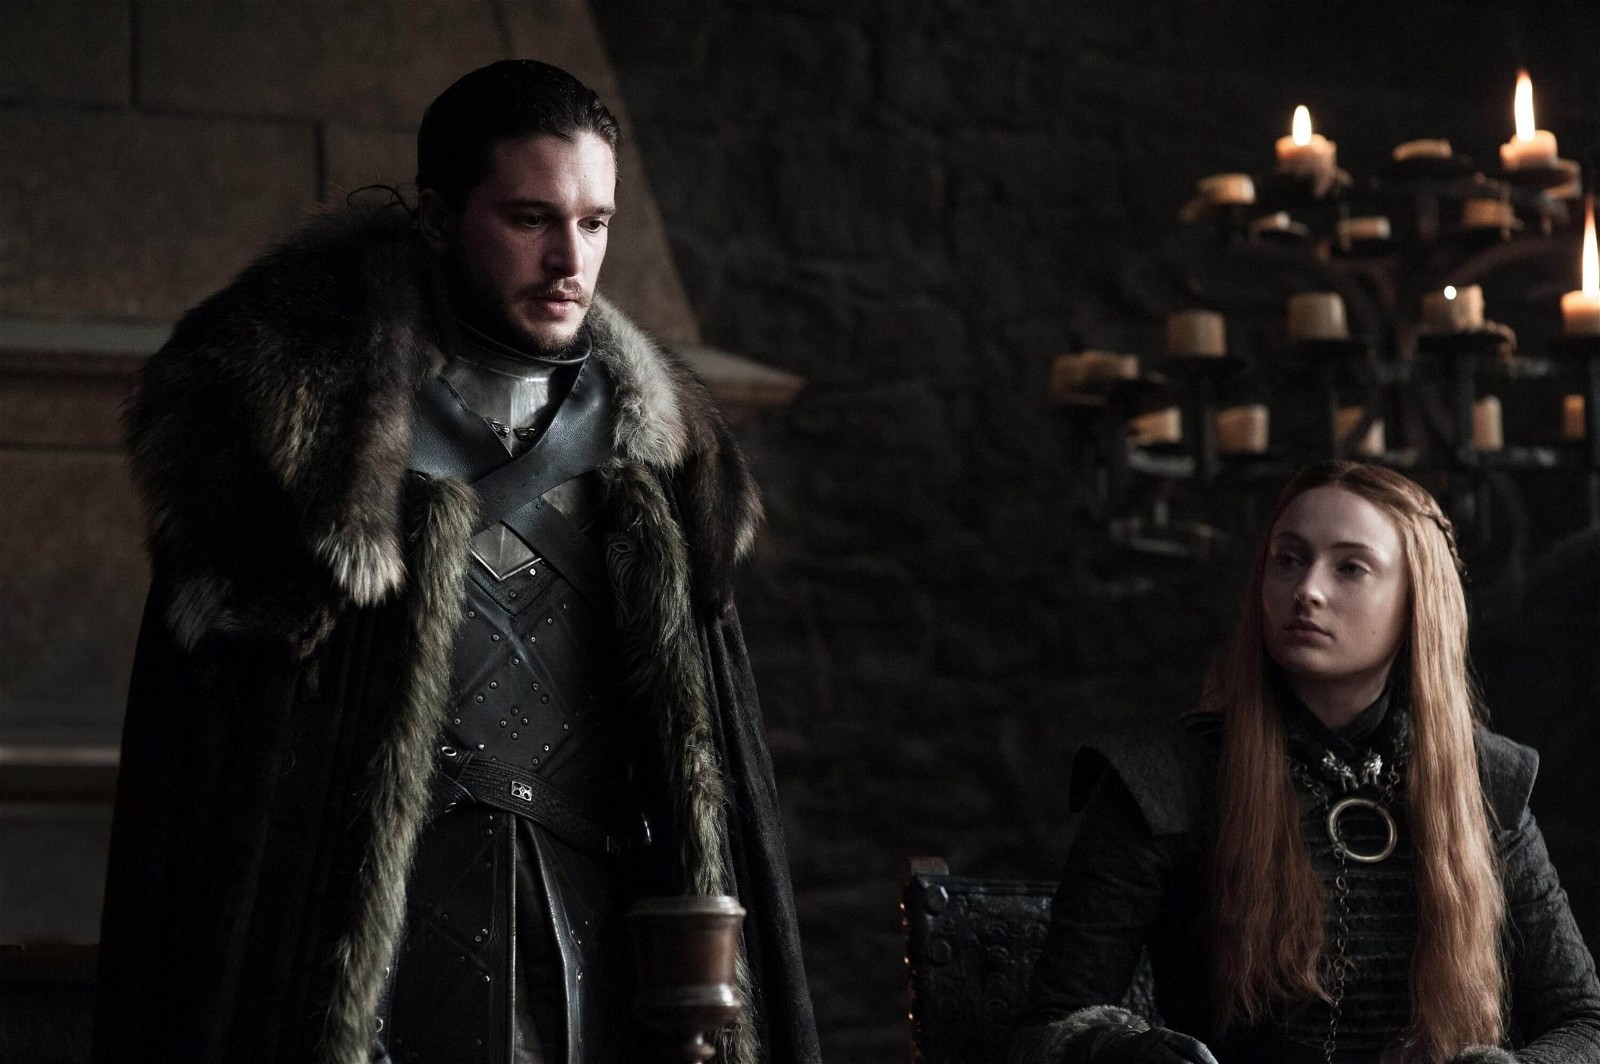 Sophie Turner and Kit Harington are yet to find major success in other projects